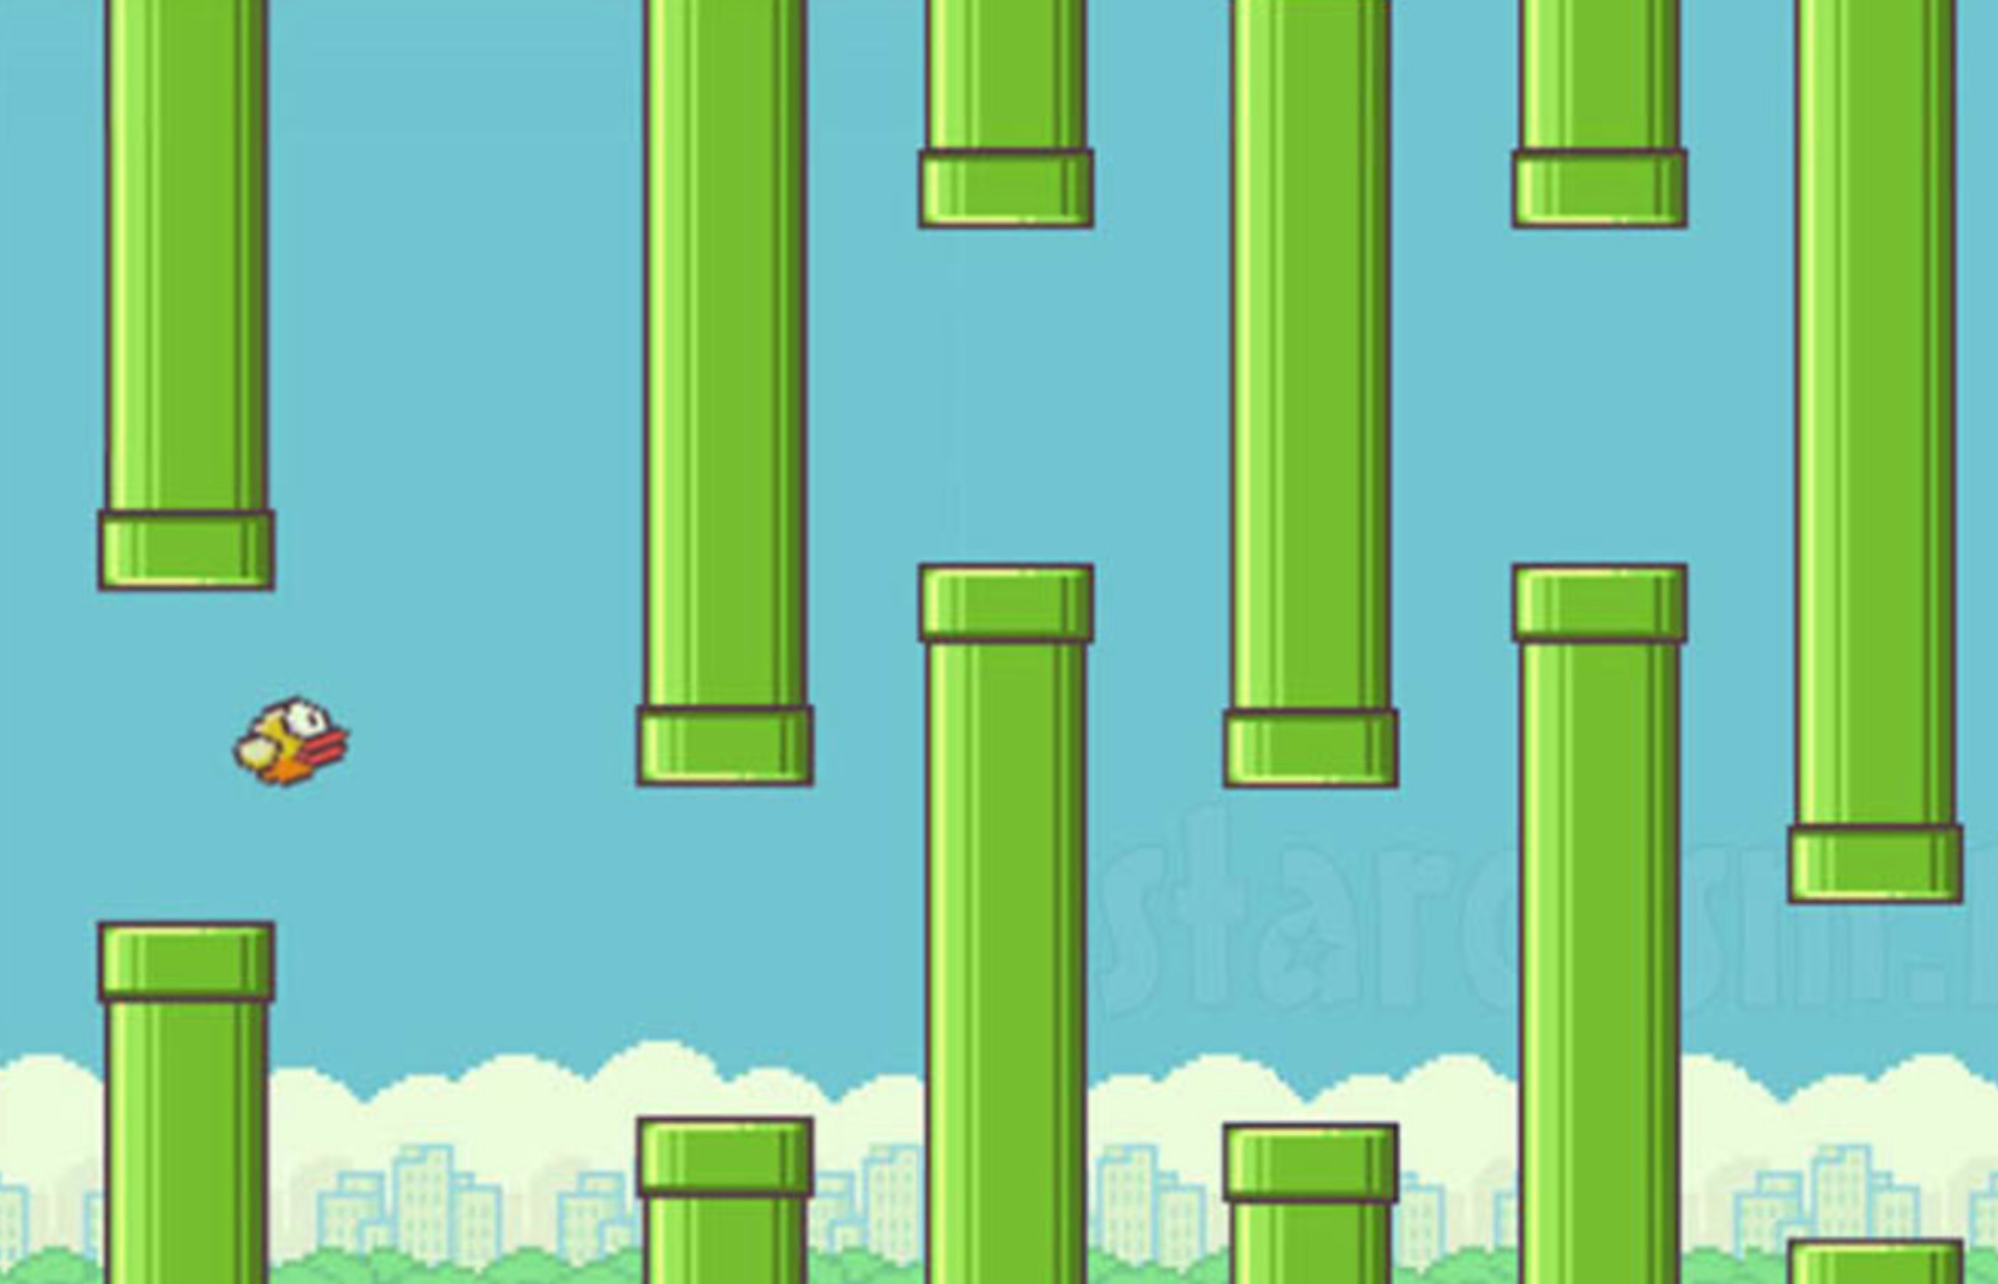 Flappy Bird developer says he's taking the game down